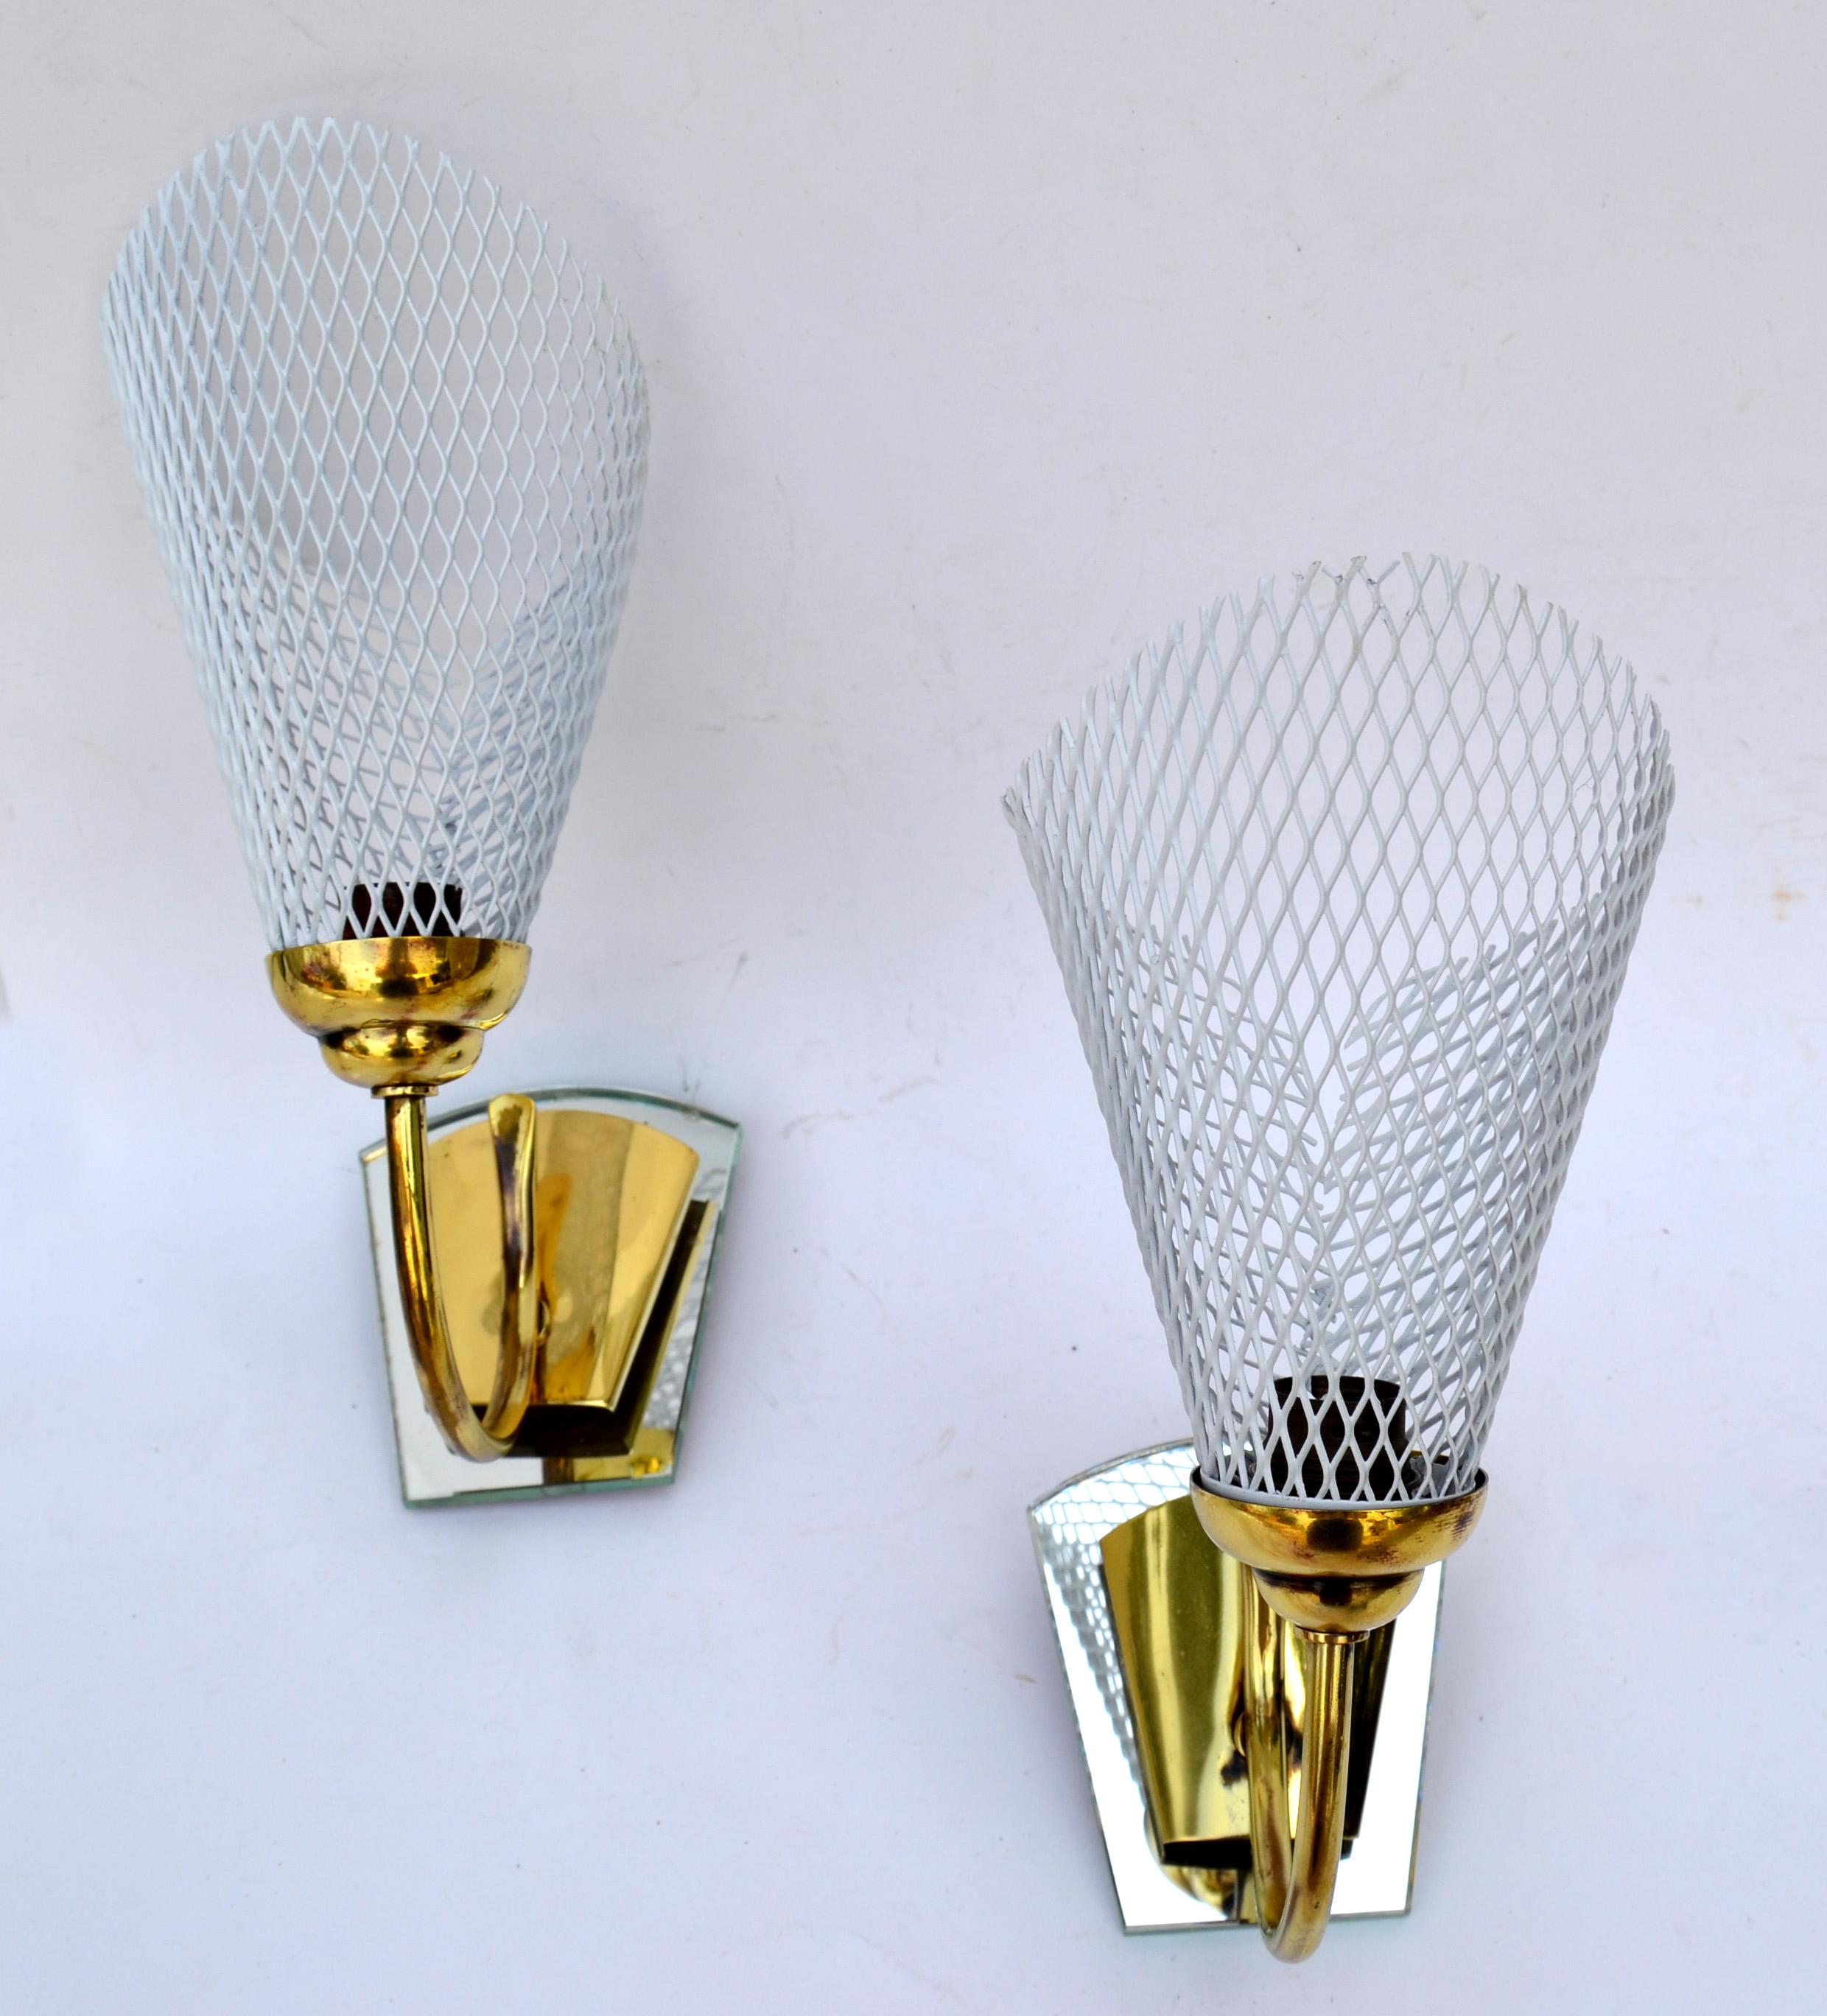 Mathieu Matégot Sconces Brass, Mirror & White Metal Mesh Shades Wall Lamps, Pair In Good Condition For Sale In Miami, FL